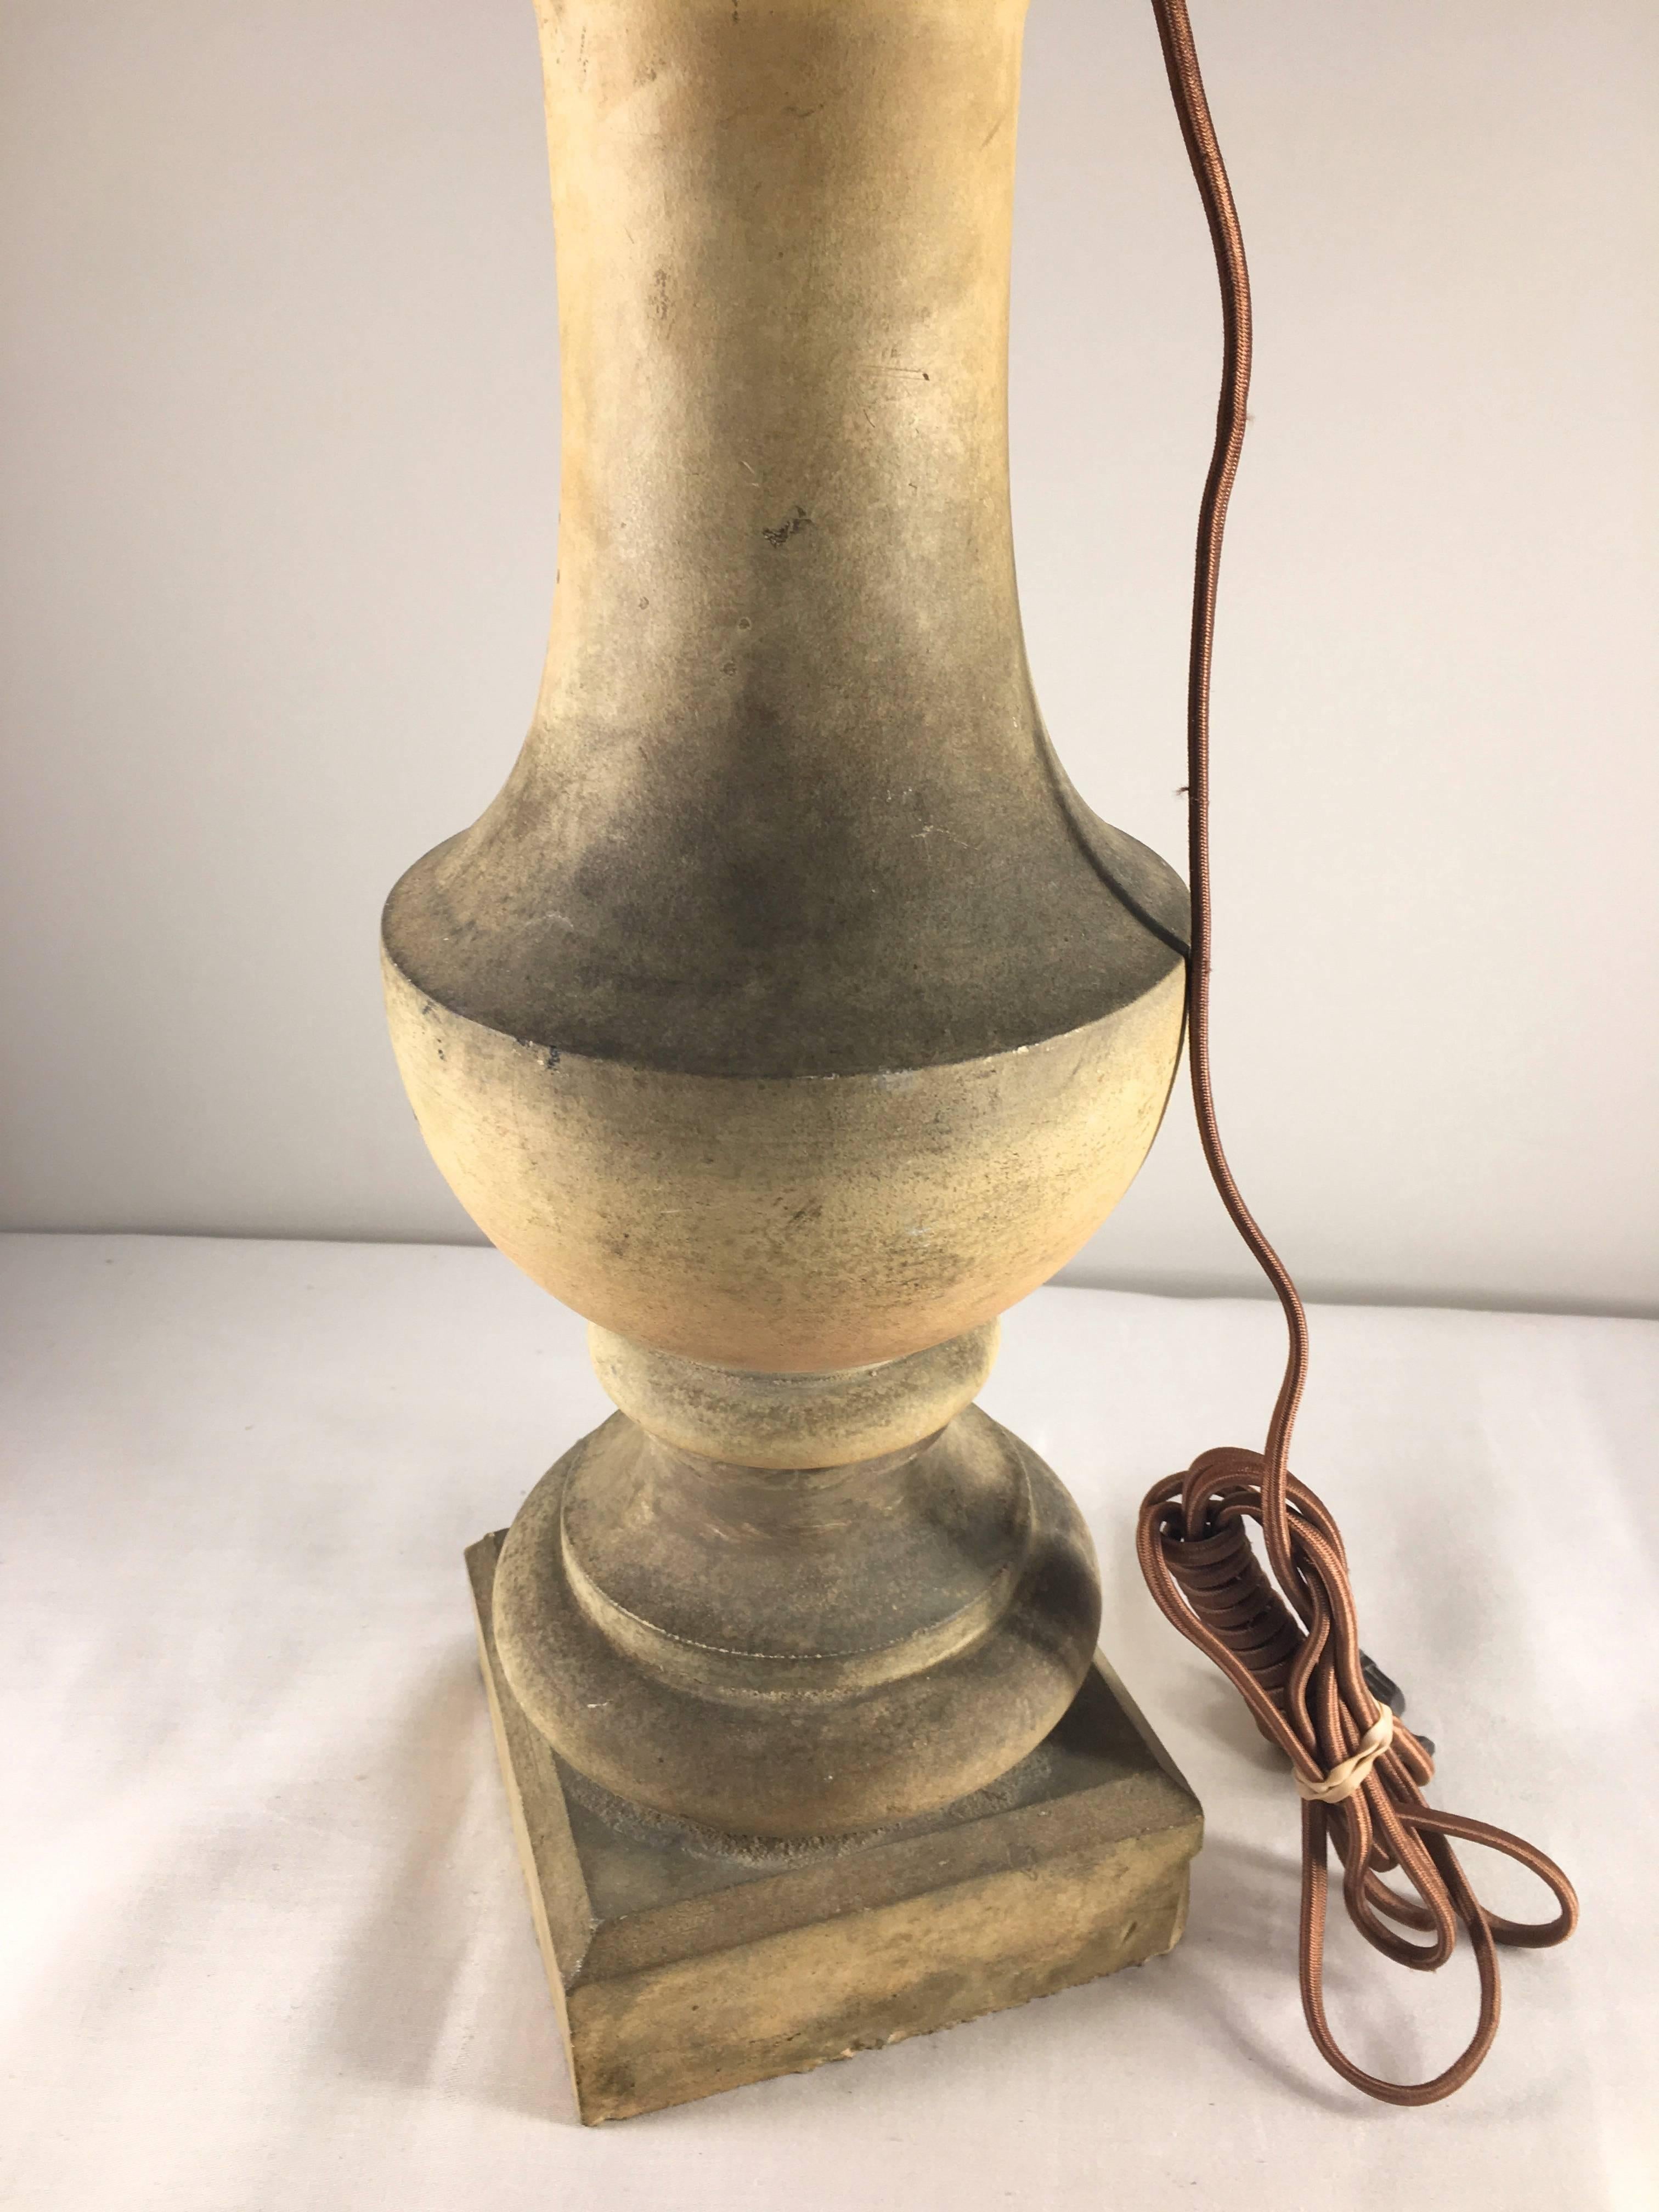 Neoclassical 18th Century Terracotta Baluster Mounted as a Lamp